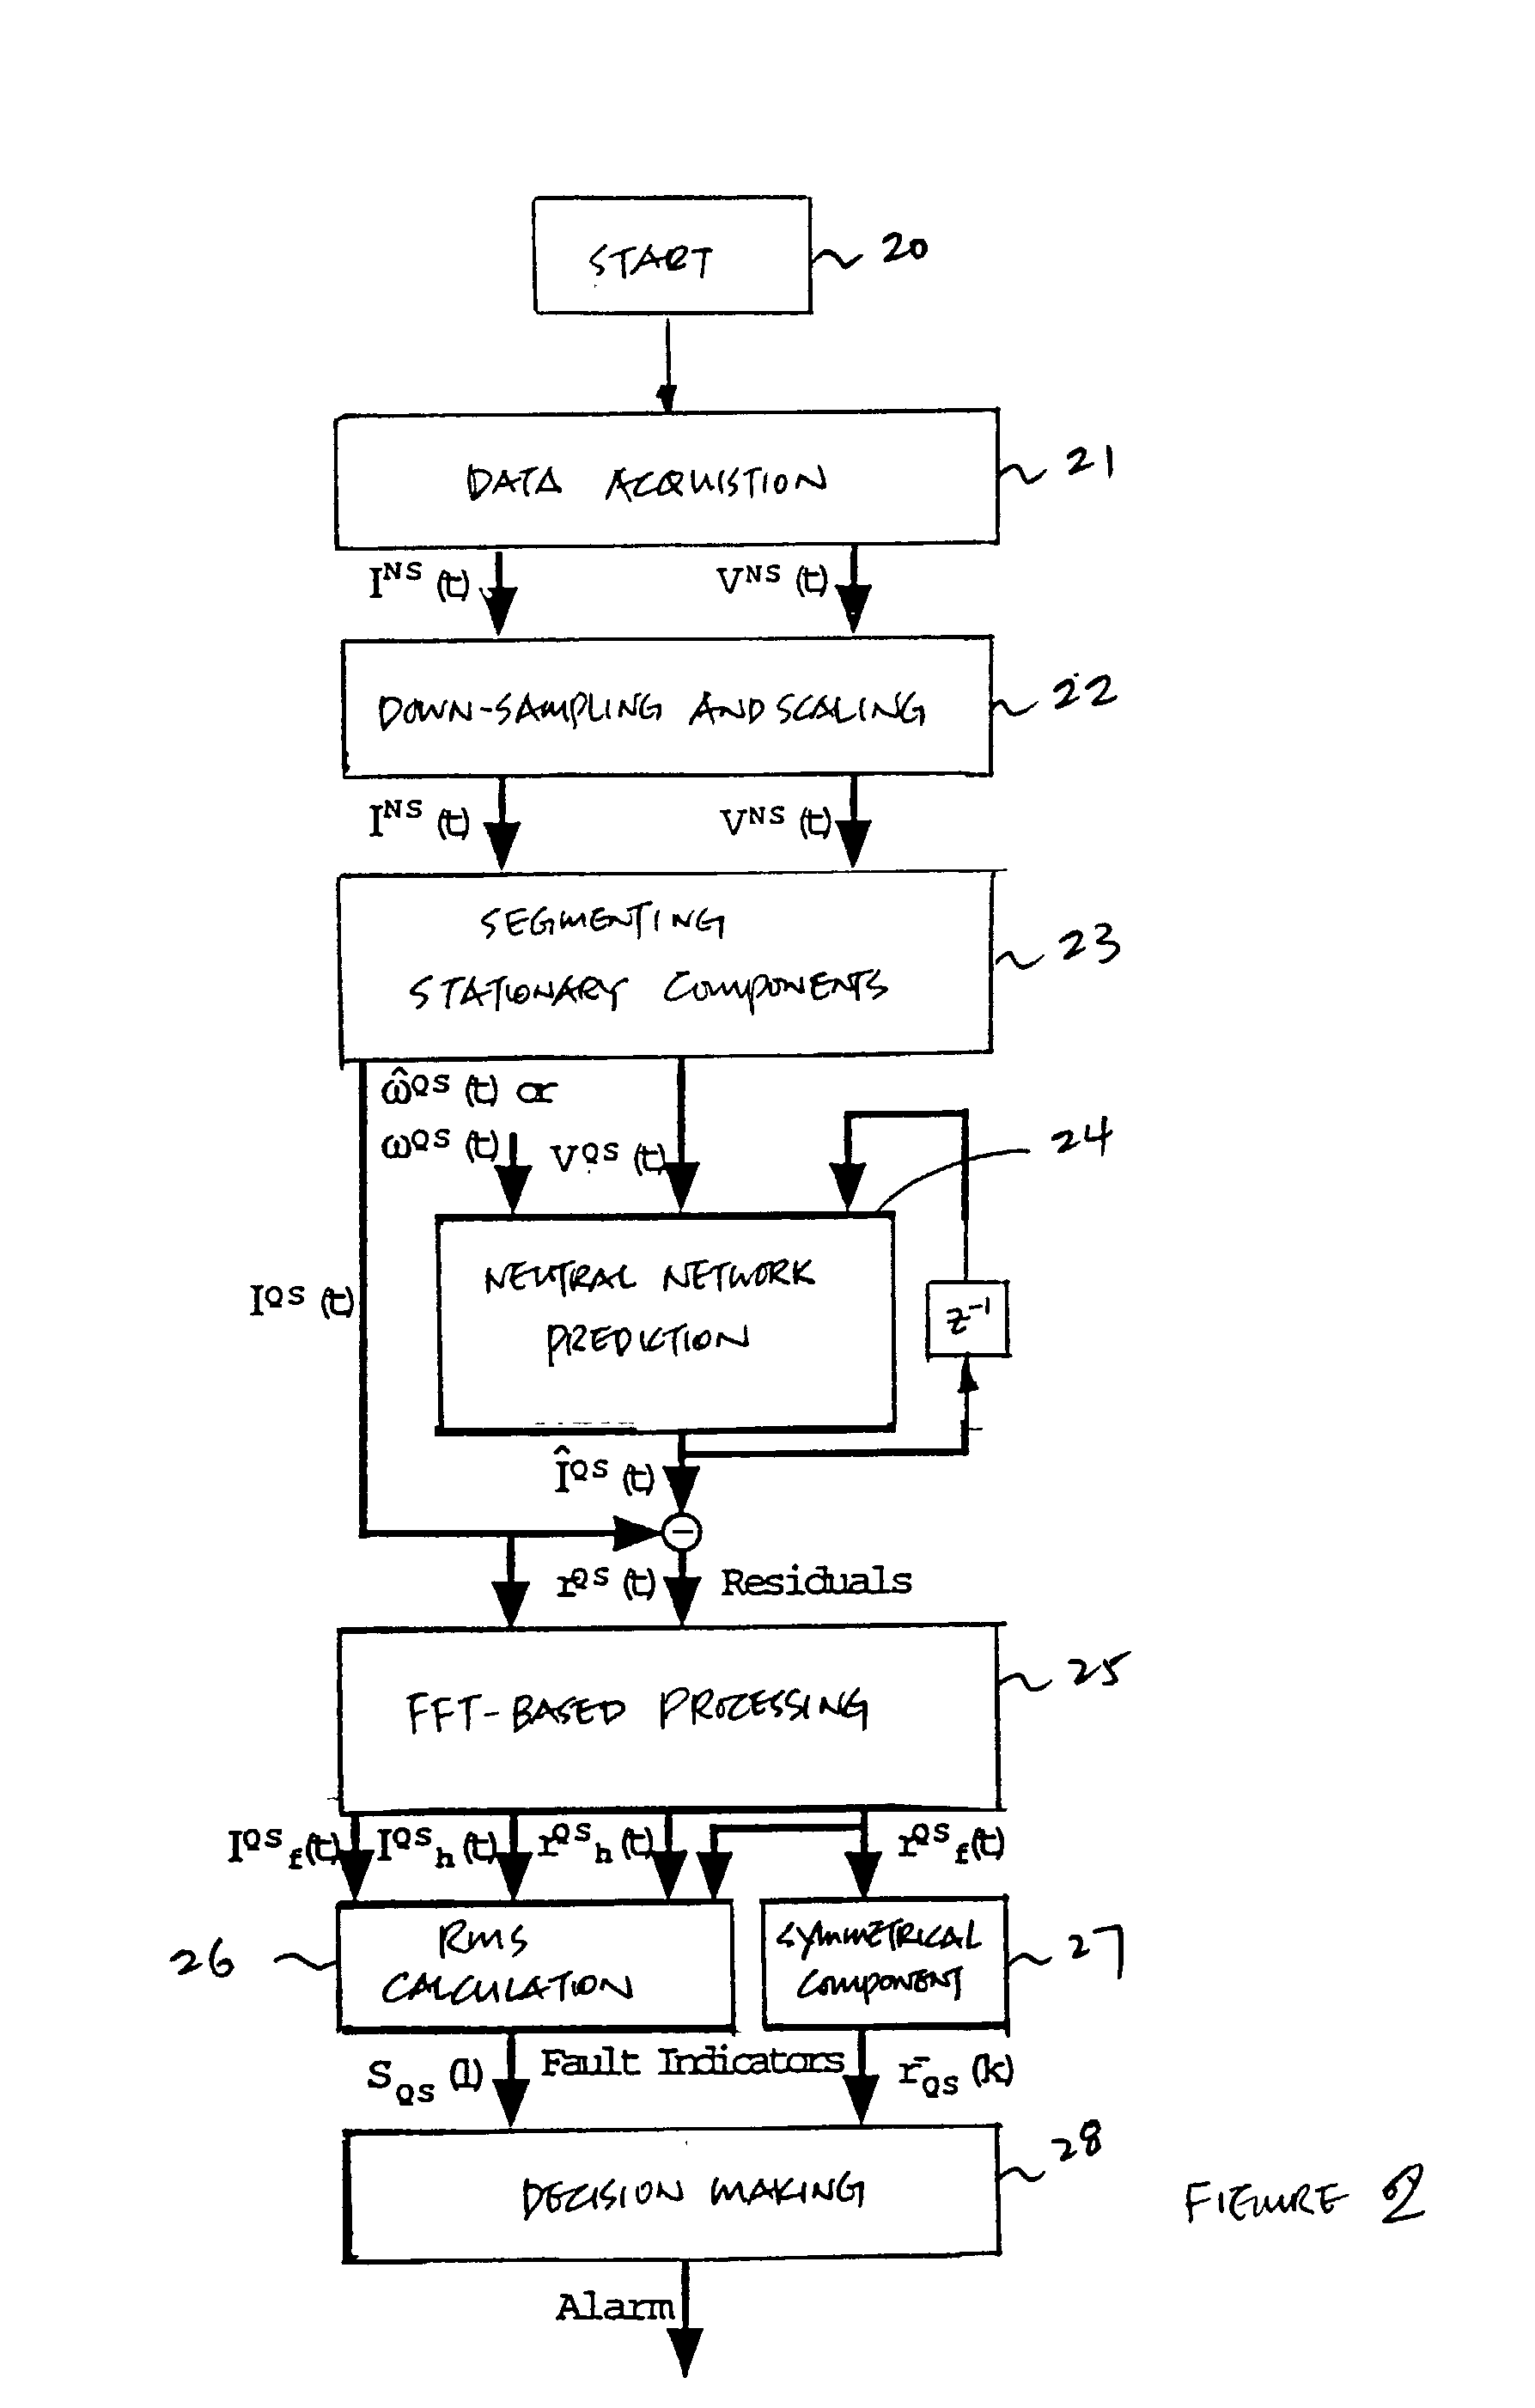 Method and system for early detection of incipient faults in electric motors